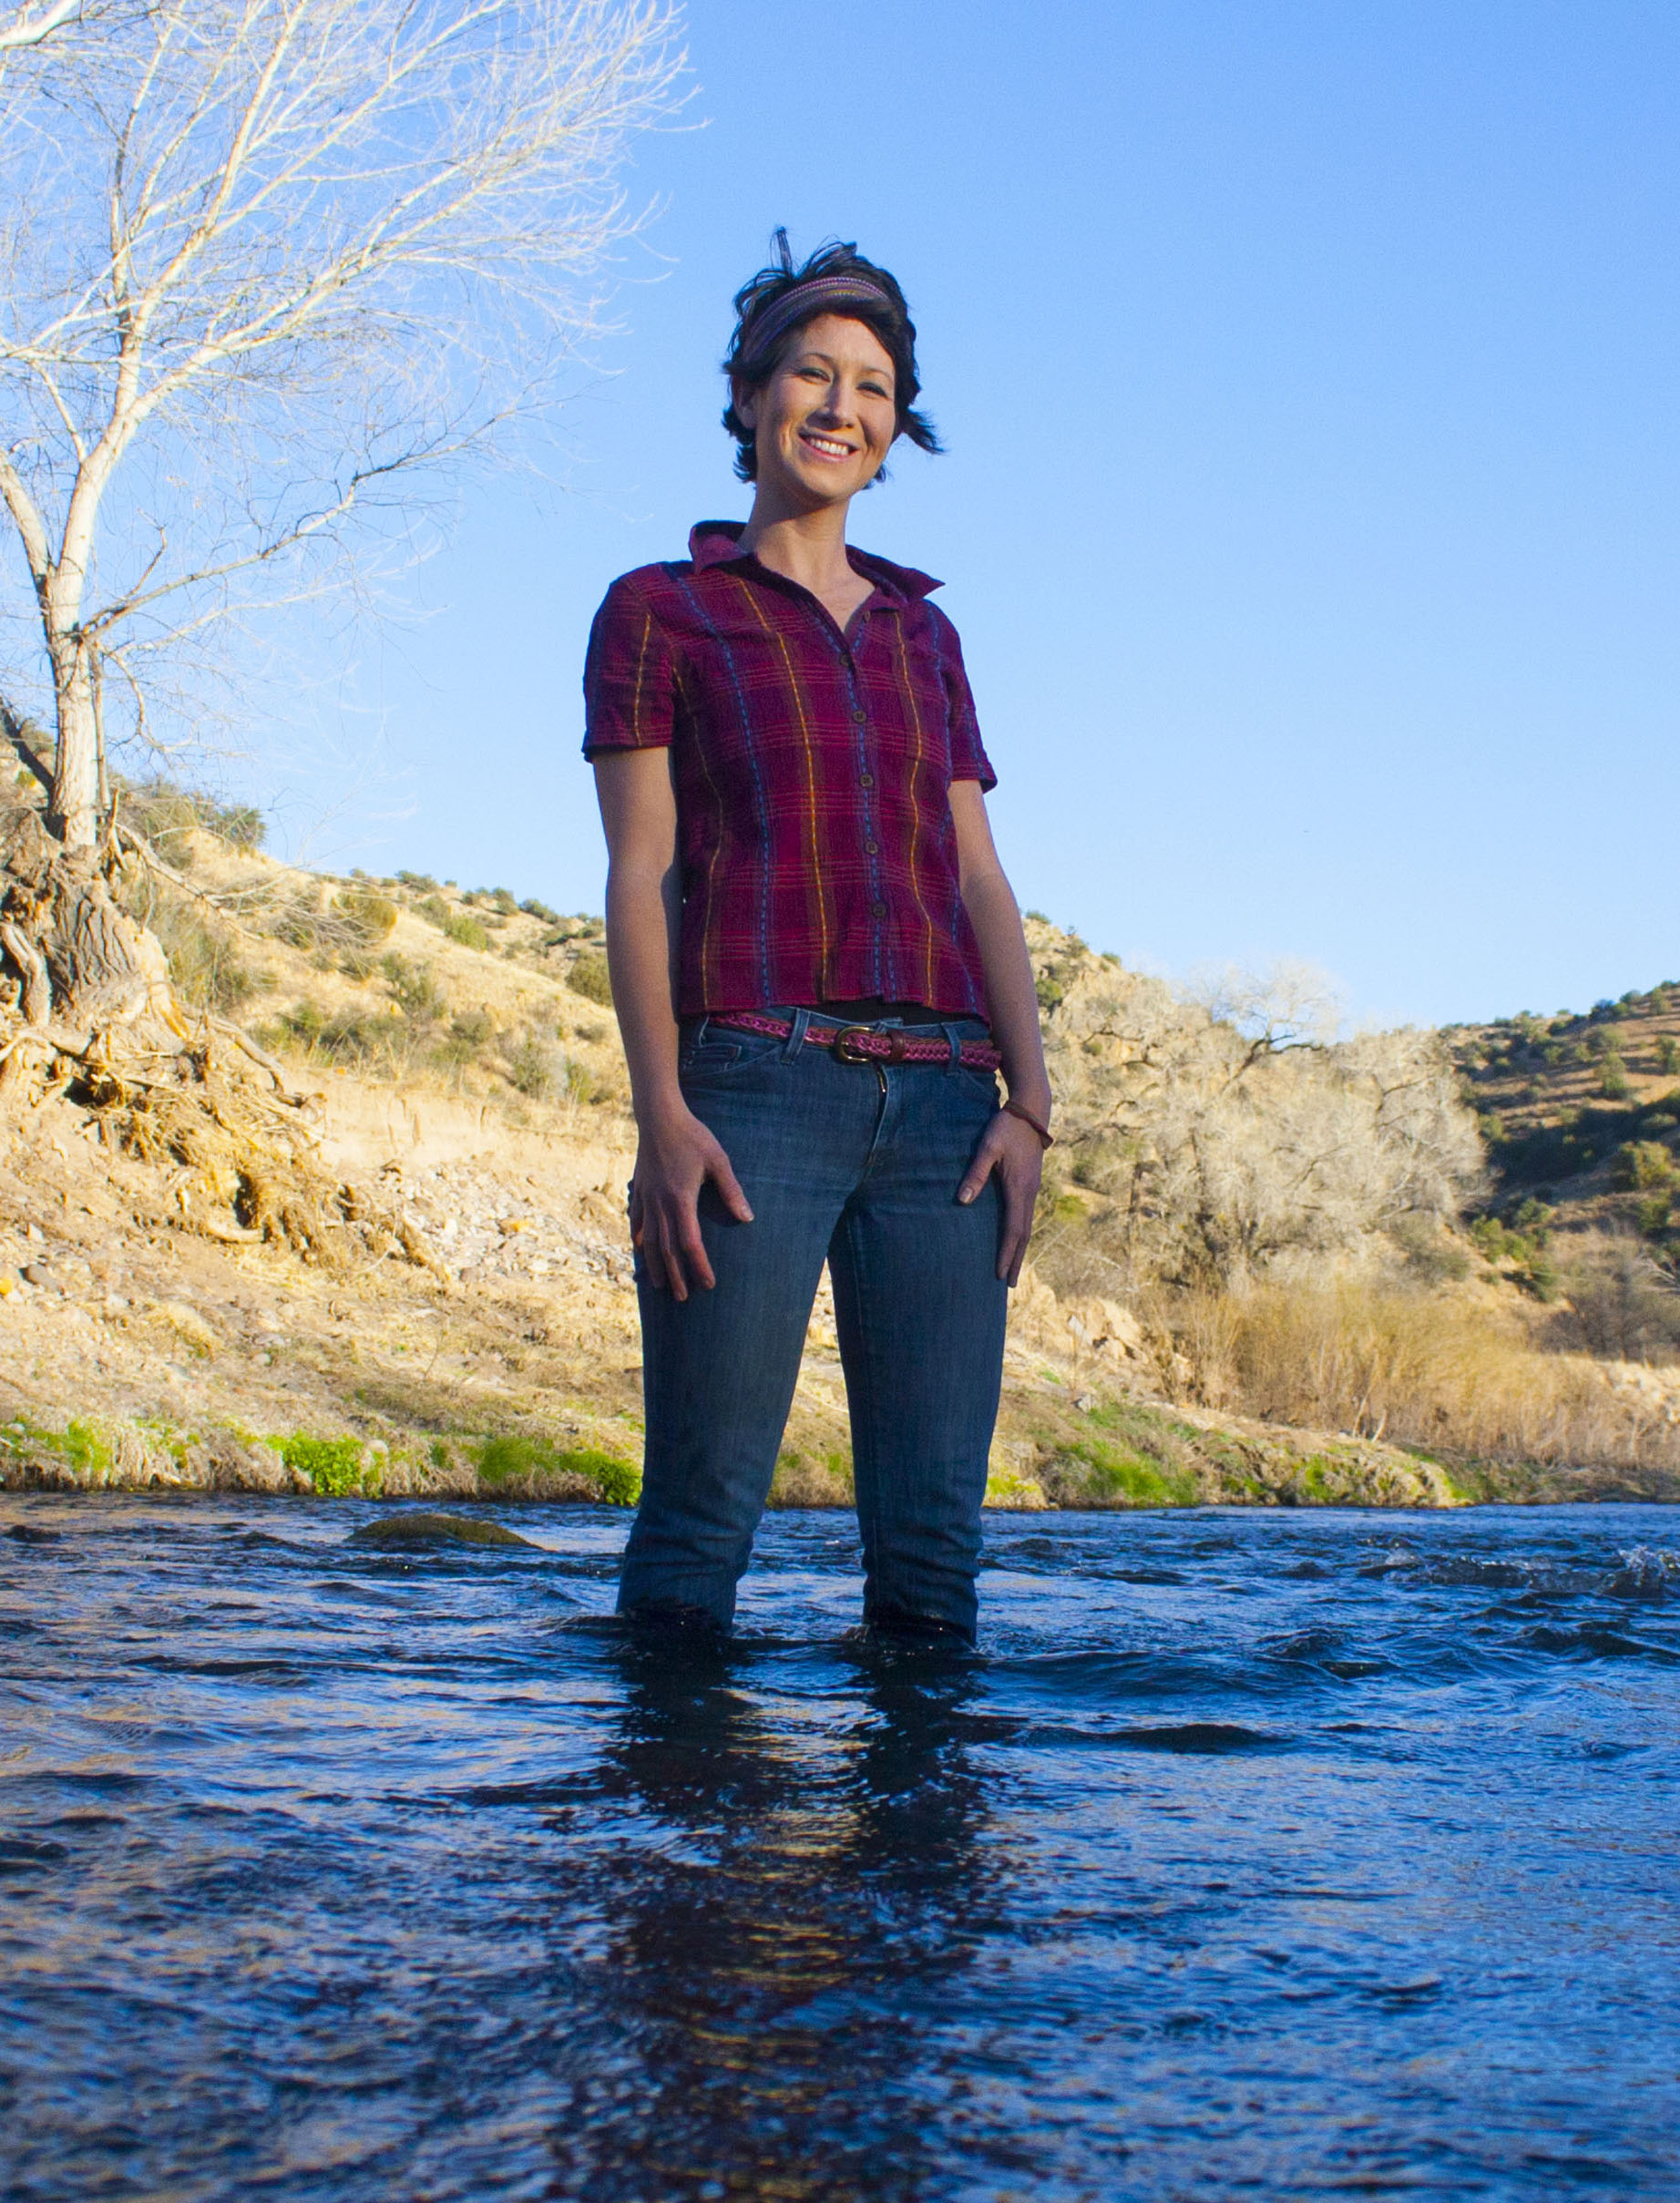 Claire catlett standing in a river